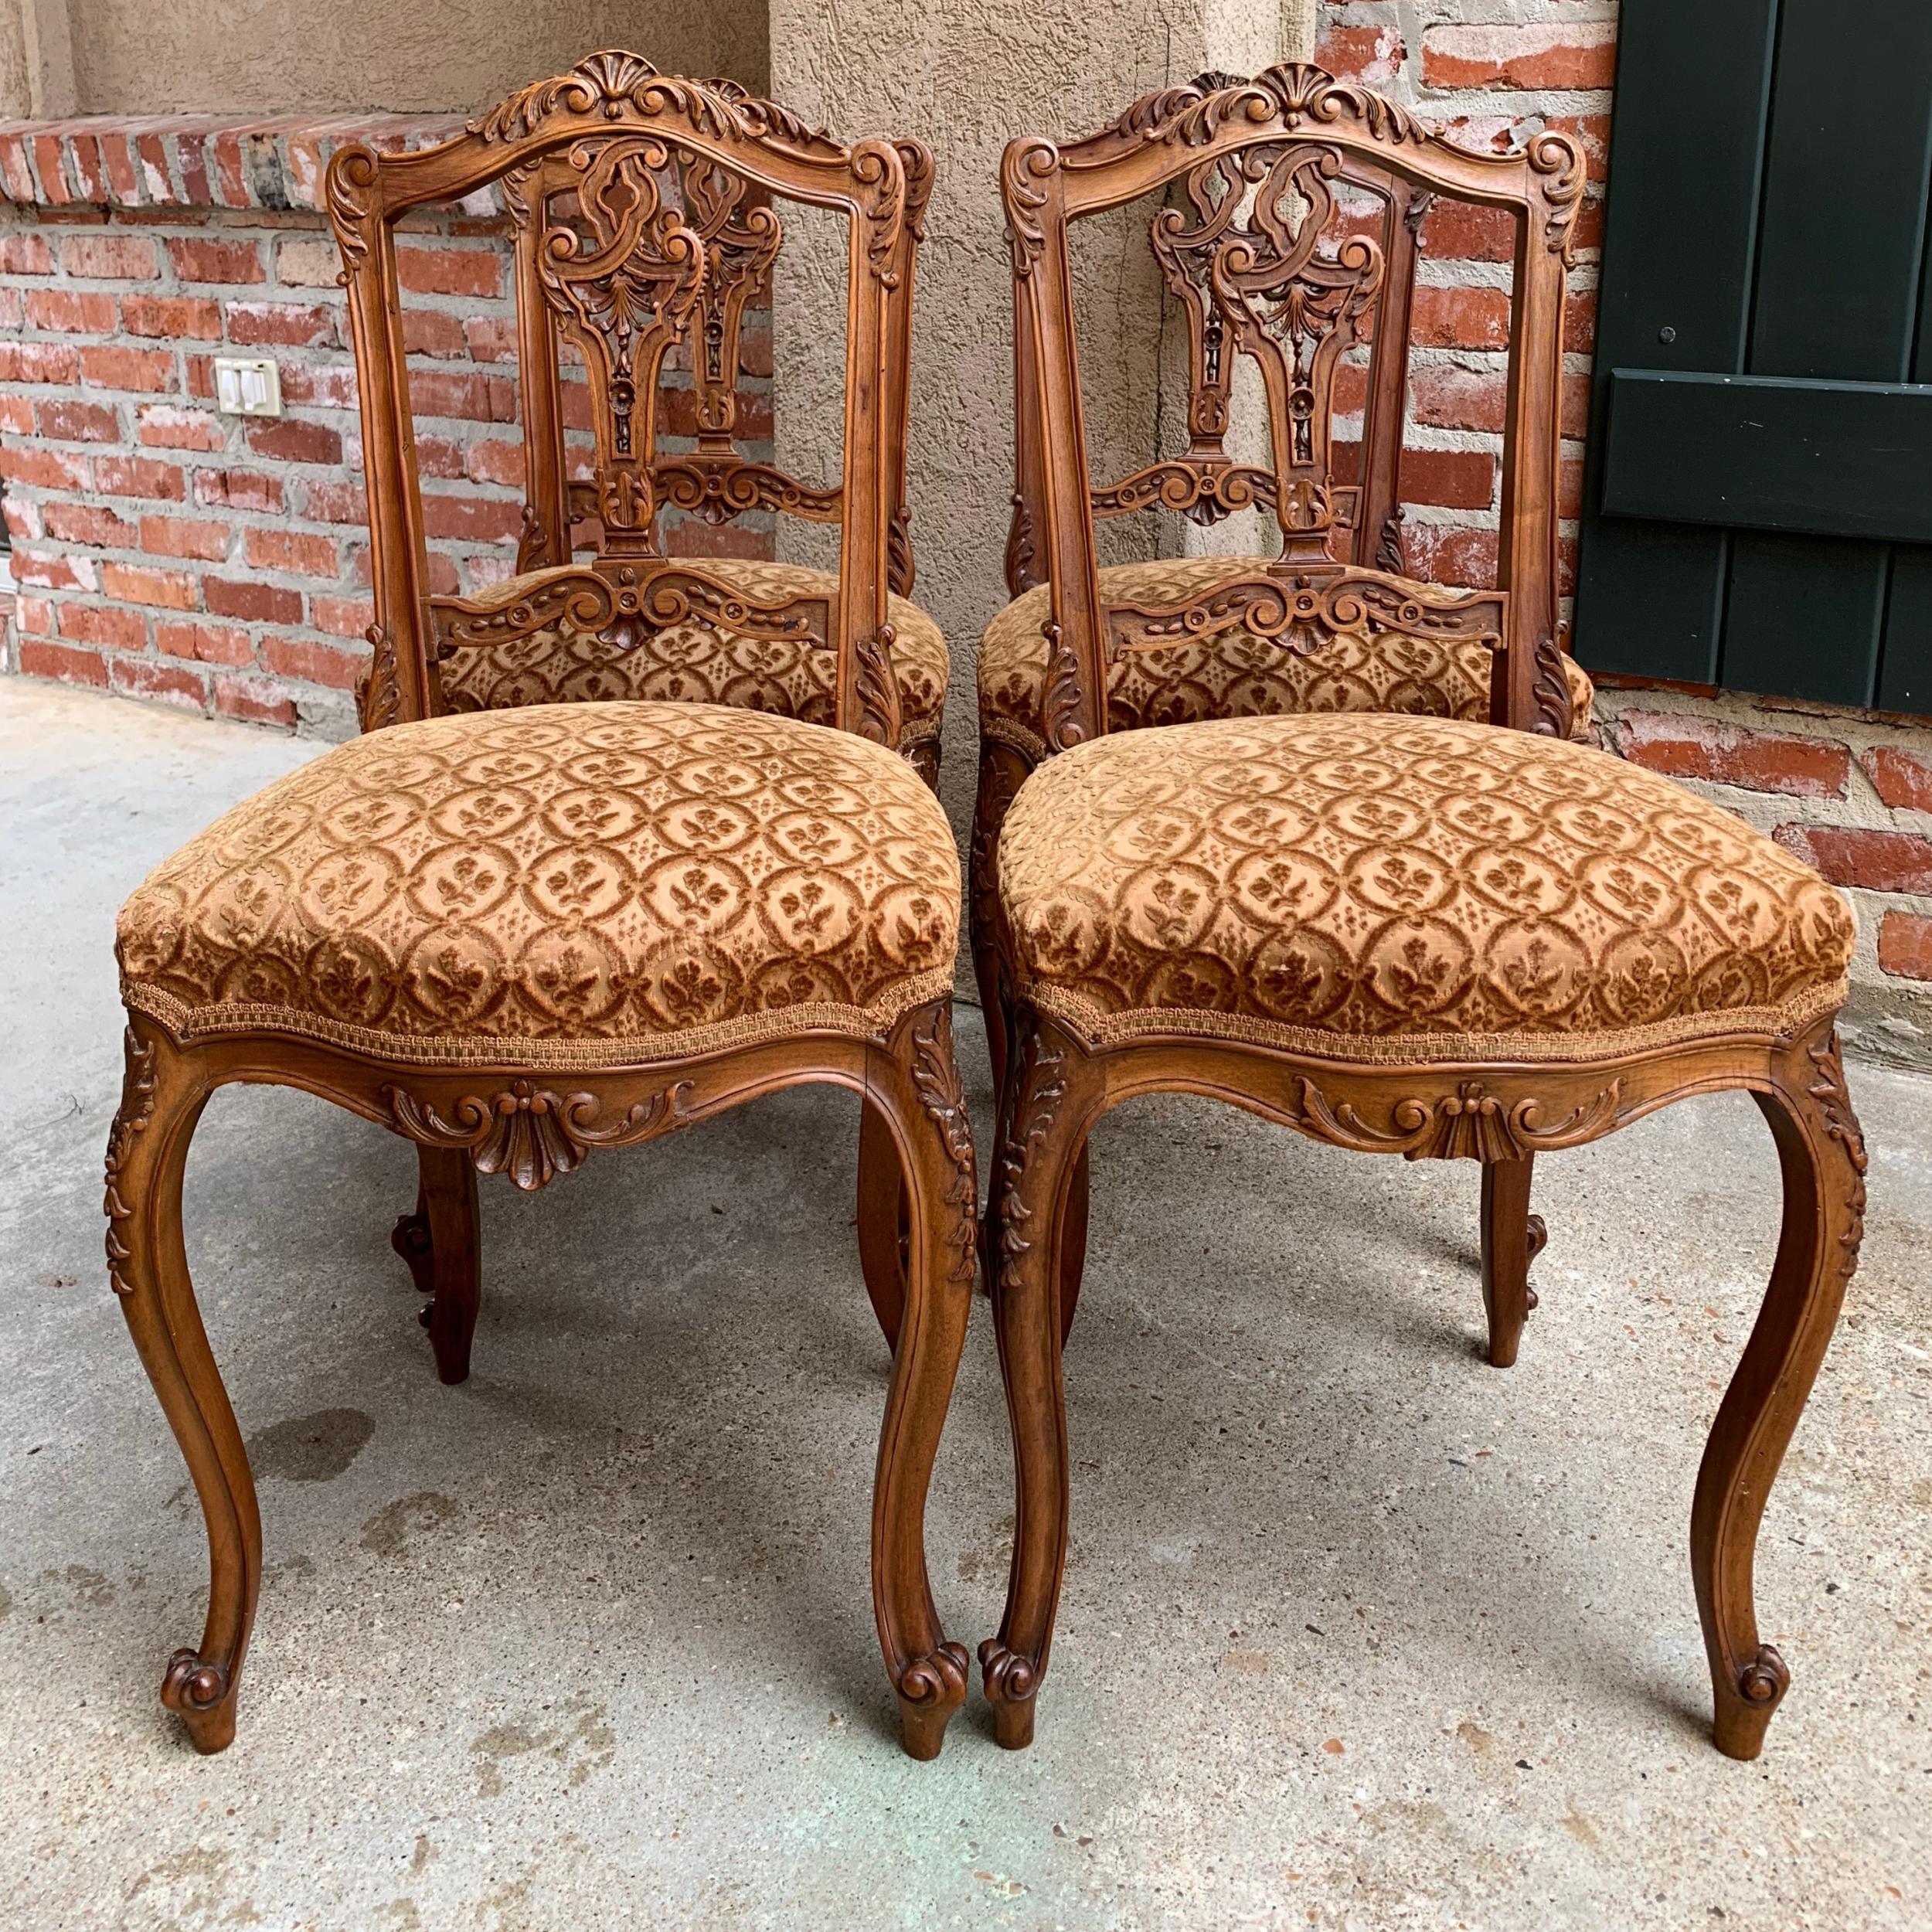 Set of 4 Antique French petite chairs - carved walnut Louis XV slipper or vanity size.

~Direct from France~
~Lovely set of 4 antique French carved walnut chairs, in a very petite size!~
~Highly carved walnut crest rail and pierced